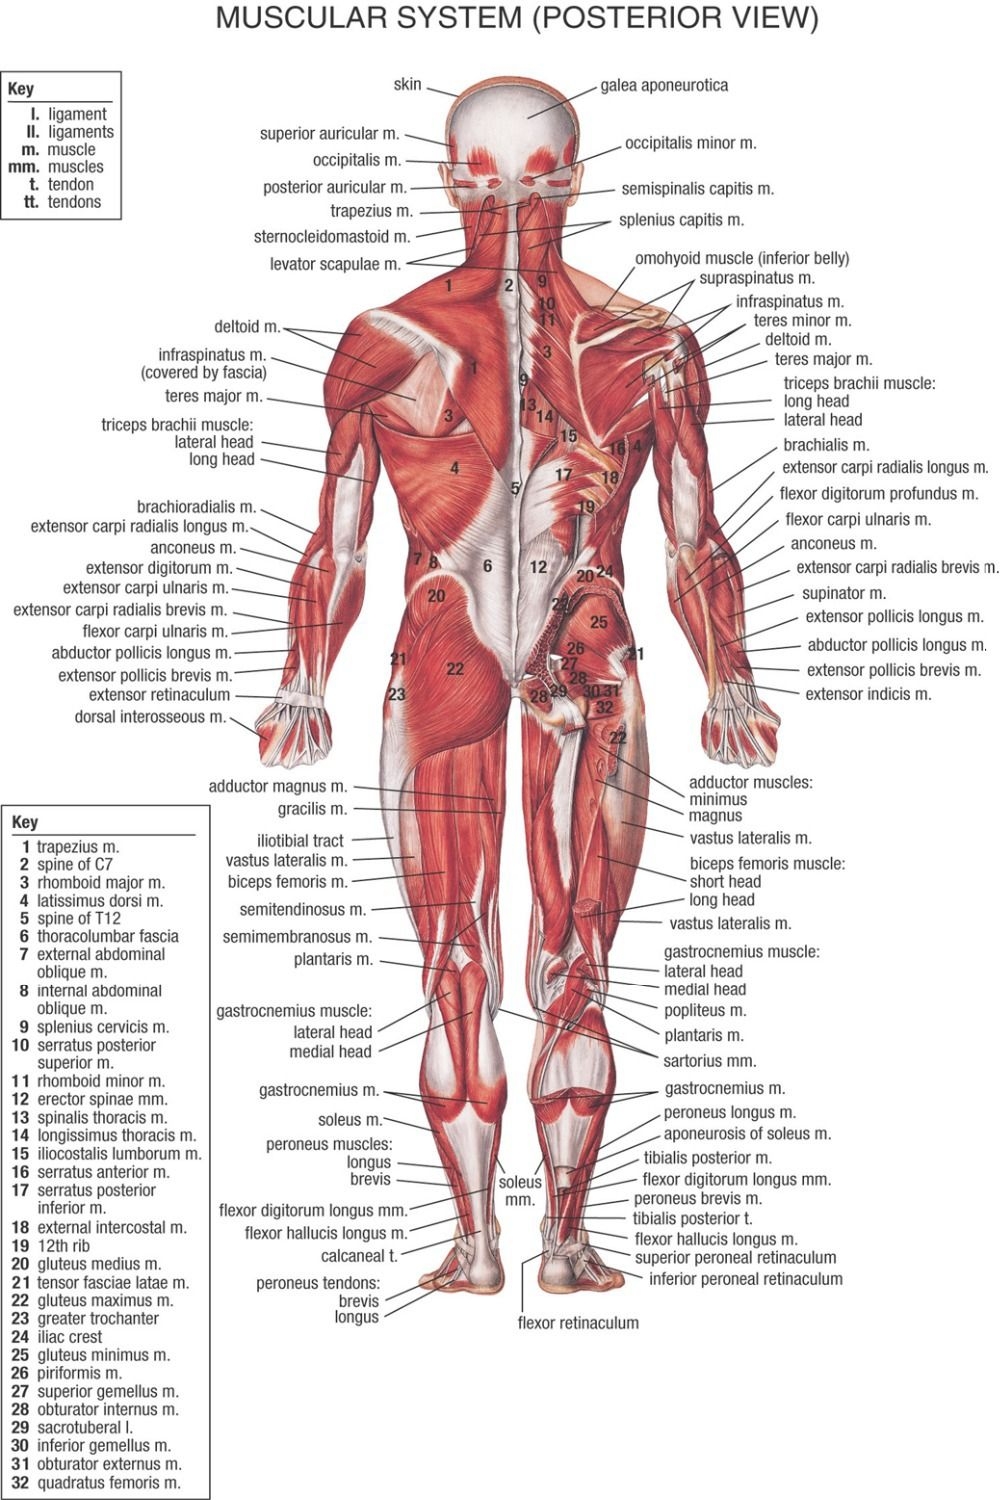 Muscular System Chart Printable 1947 Google Search Muscular System Anatomy Human Body Muscles Muscle Anatomy